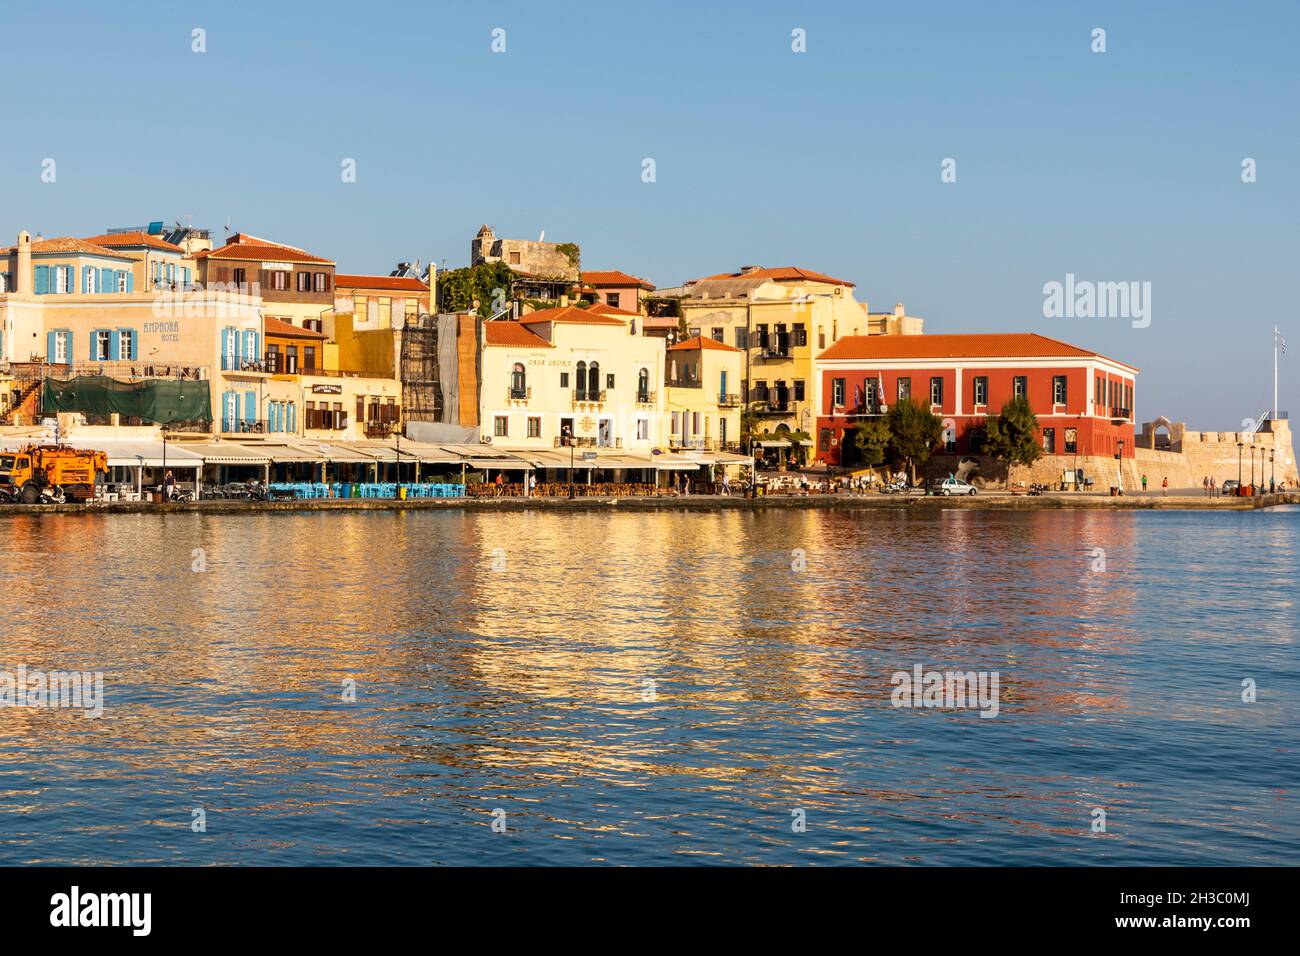 The old Venetian harbour in the late afternoon, Chania, Crete, Greece. Stock Photo